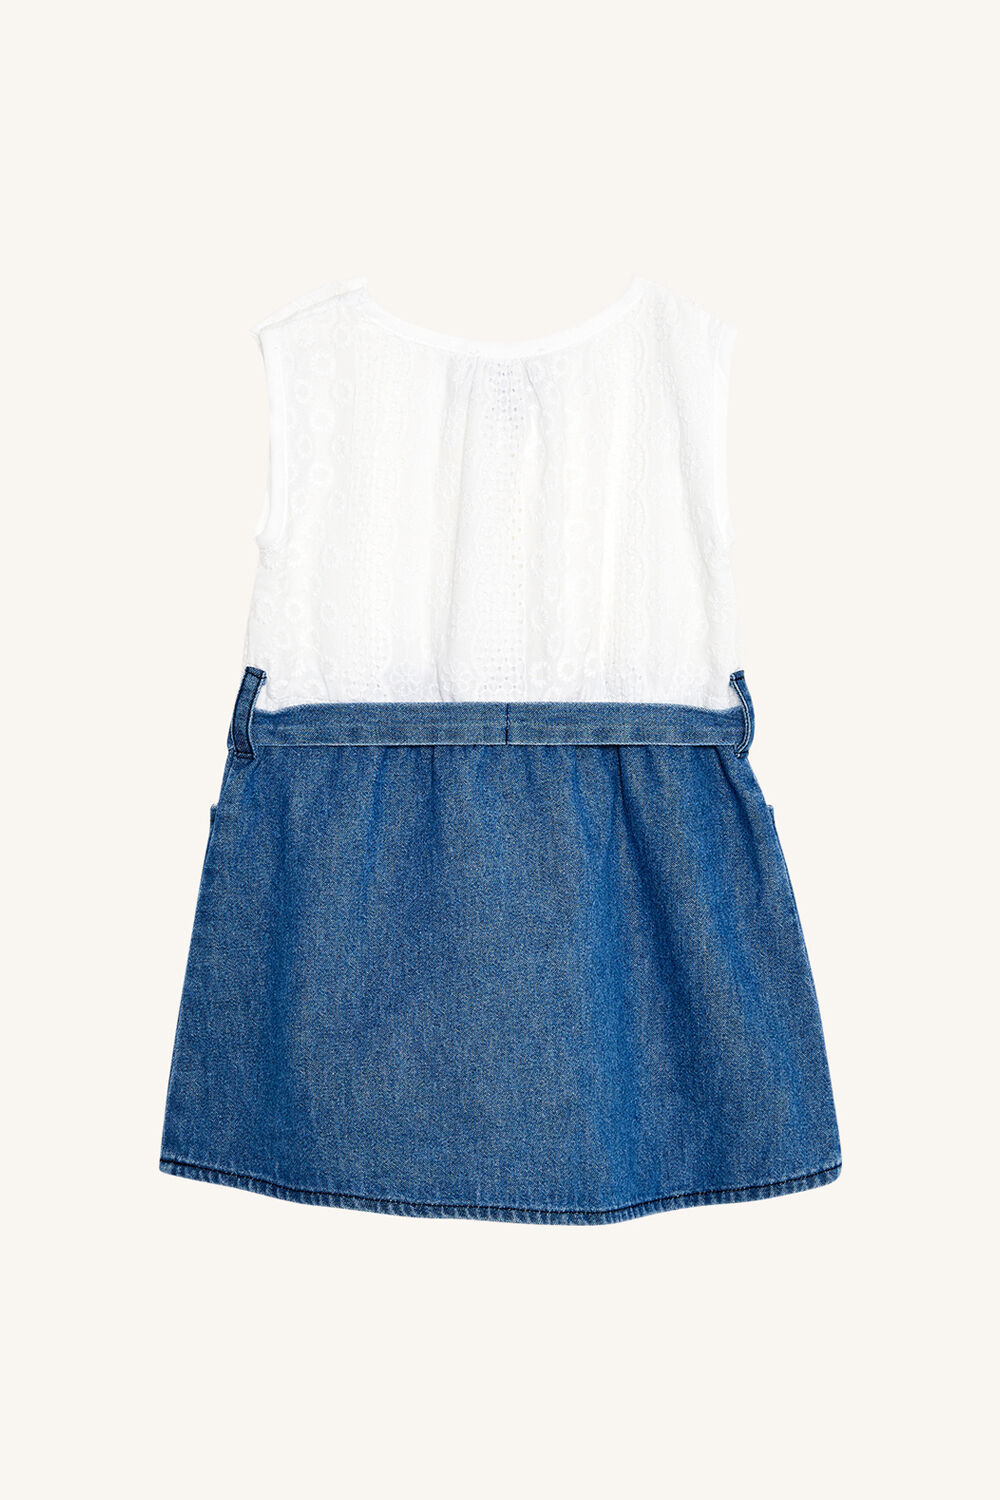 BABY GIRL CHAMBRAY 2 FA DRESS in colour CLOUD DANCER